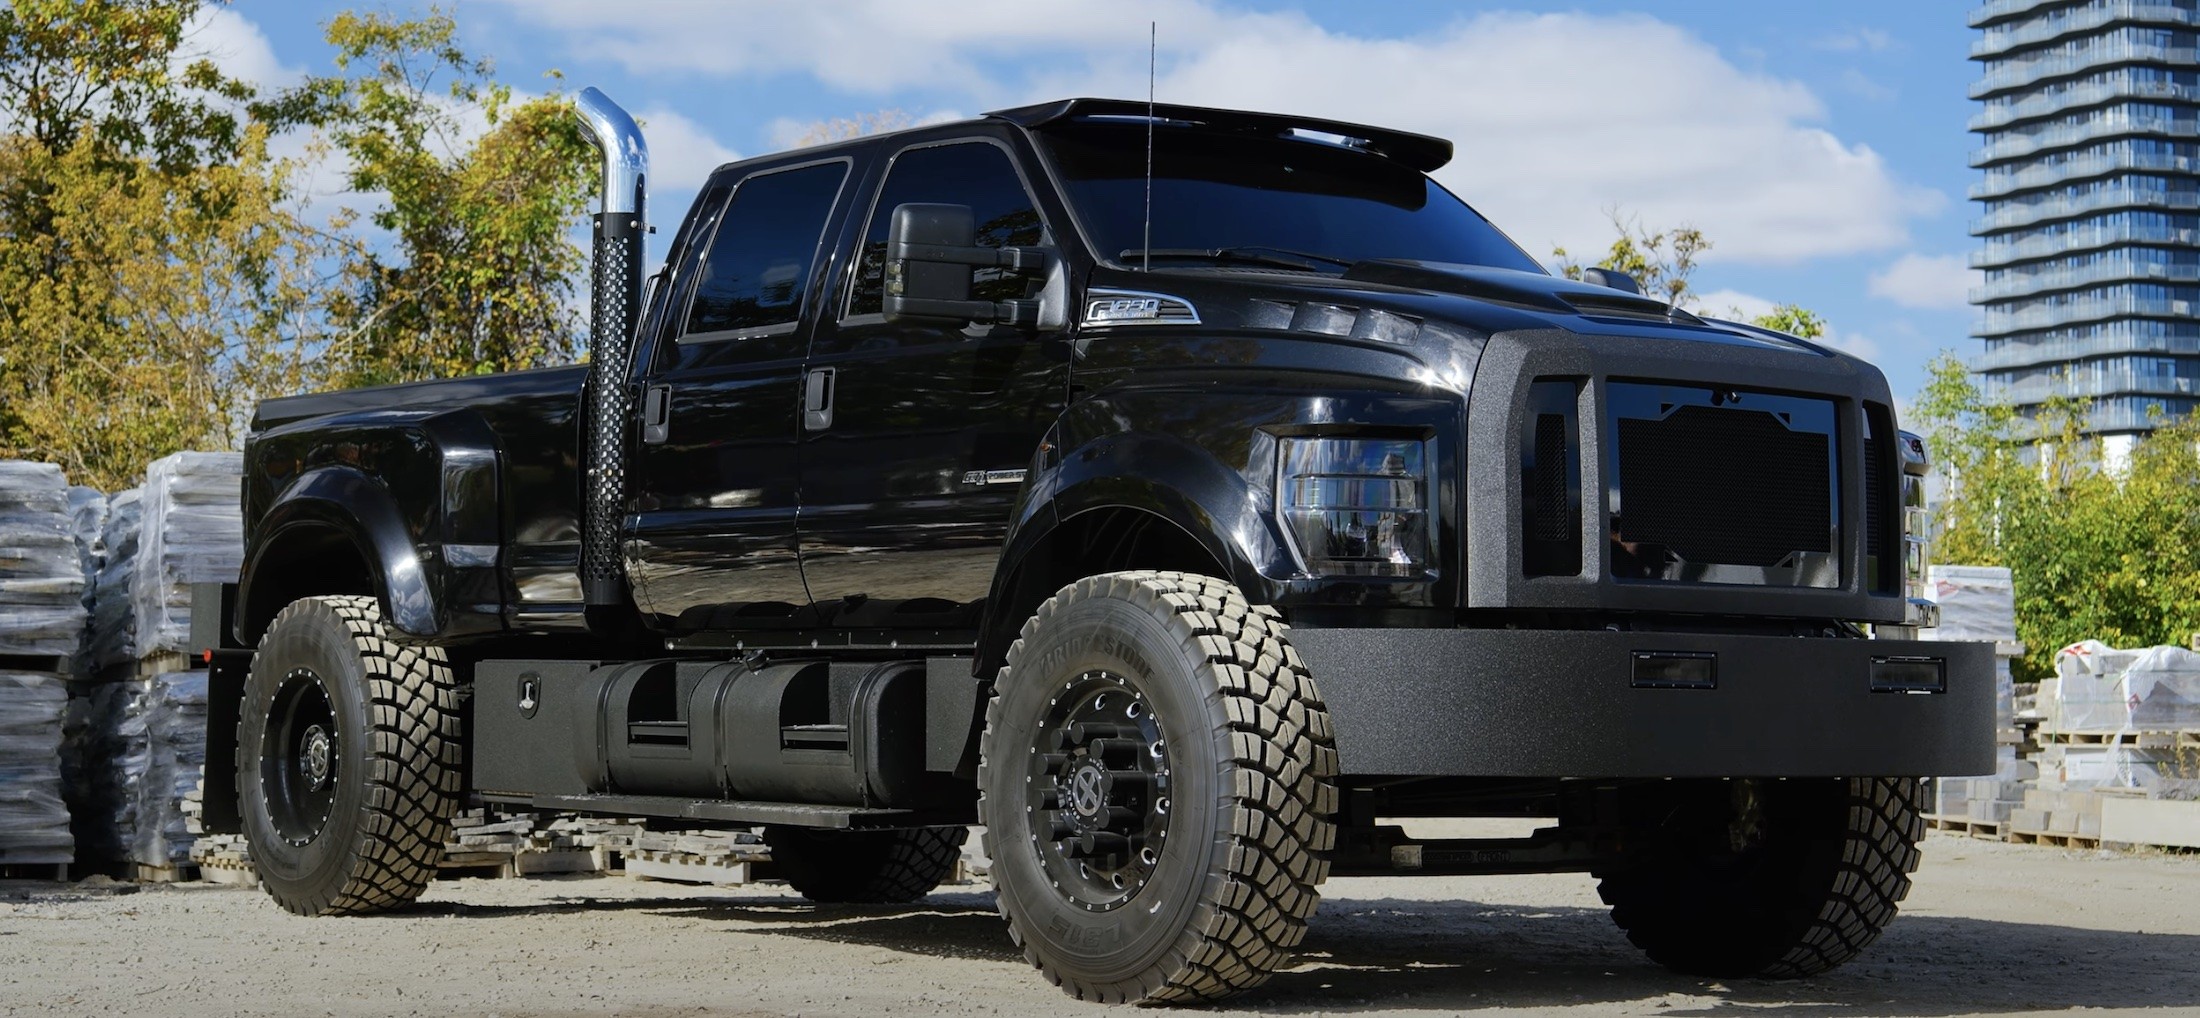 https://s1.cdn.autoevolution.com/images/news/gallery/ford-f-650-super-truck-makes-no-sense-whatsoever-it-is-a-bully-on-the-road_1.jpg